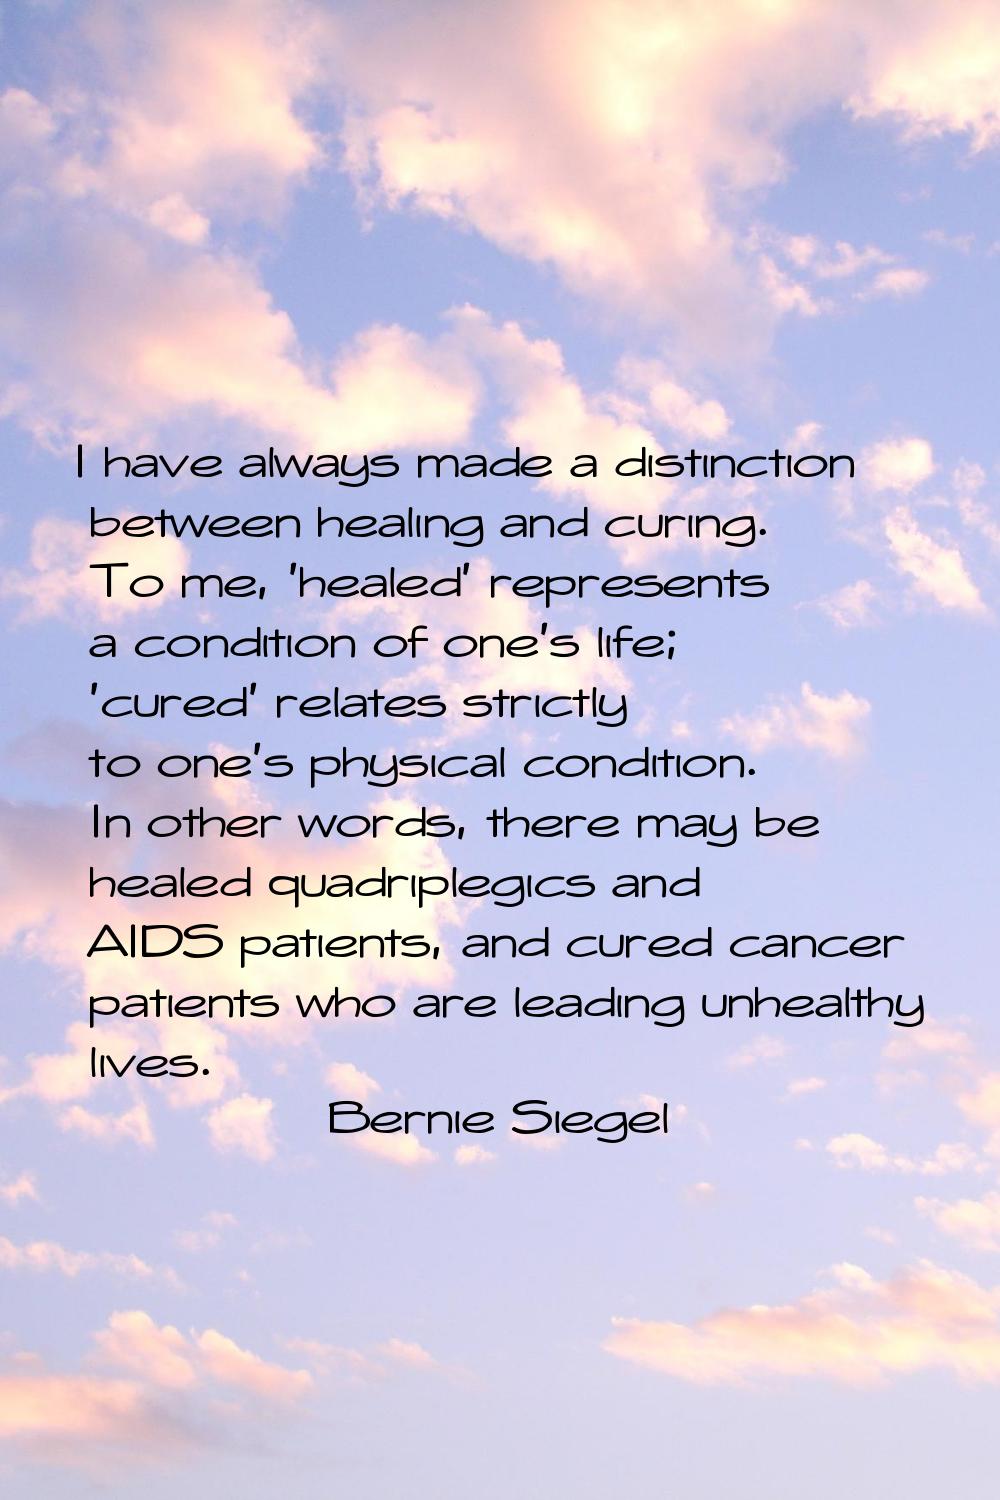 I have always made a distinction between healing and curing. To me, 'healed' represents a condition